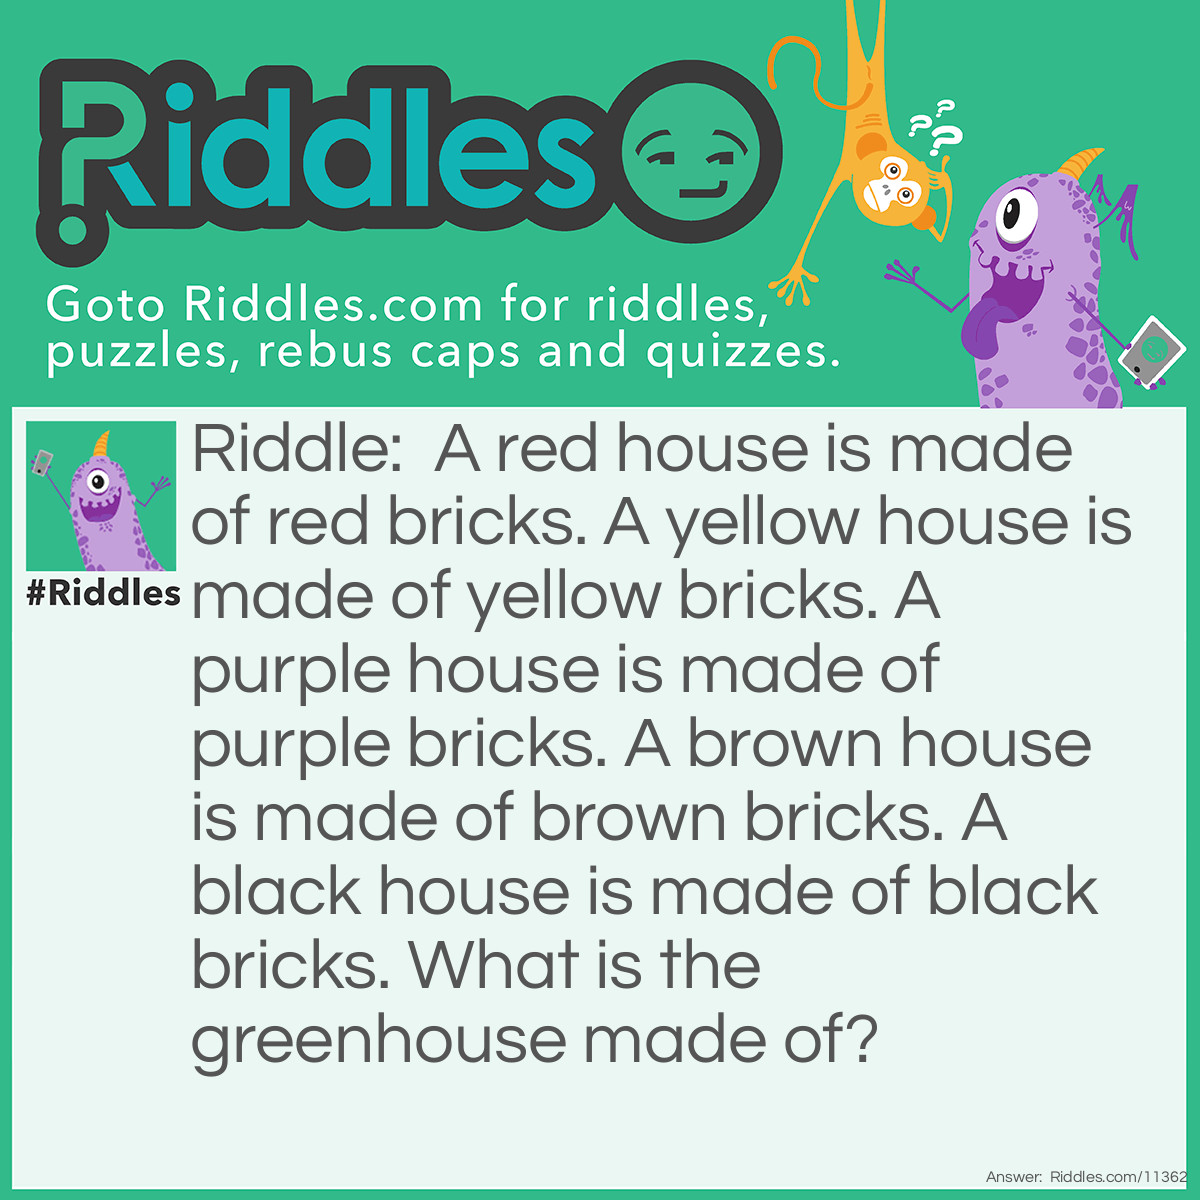 Riddle: A red house is made of red bricks. A yellow house is made of yellow bricks. A purple house is made of purple bricks. A brown house is made of brown bricks. A black house is made of black bricks. What is the greenhouse made of? Answer: A greenhouse is made of glass.